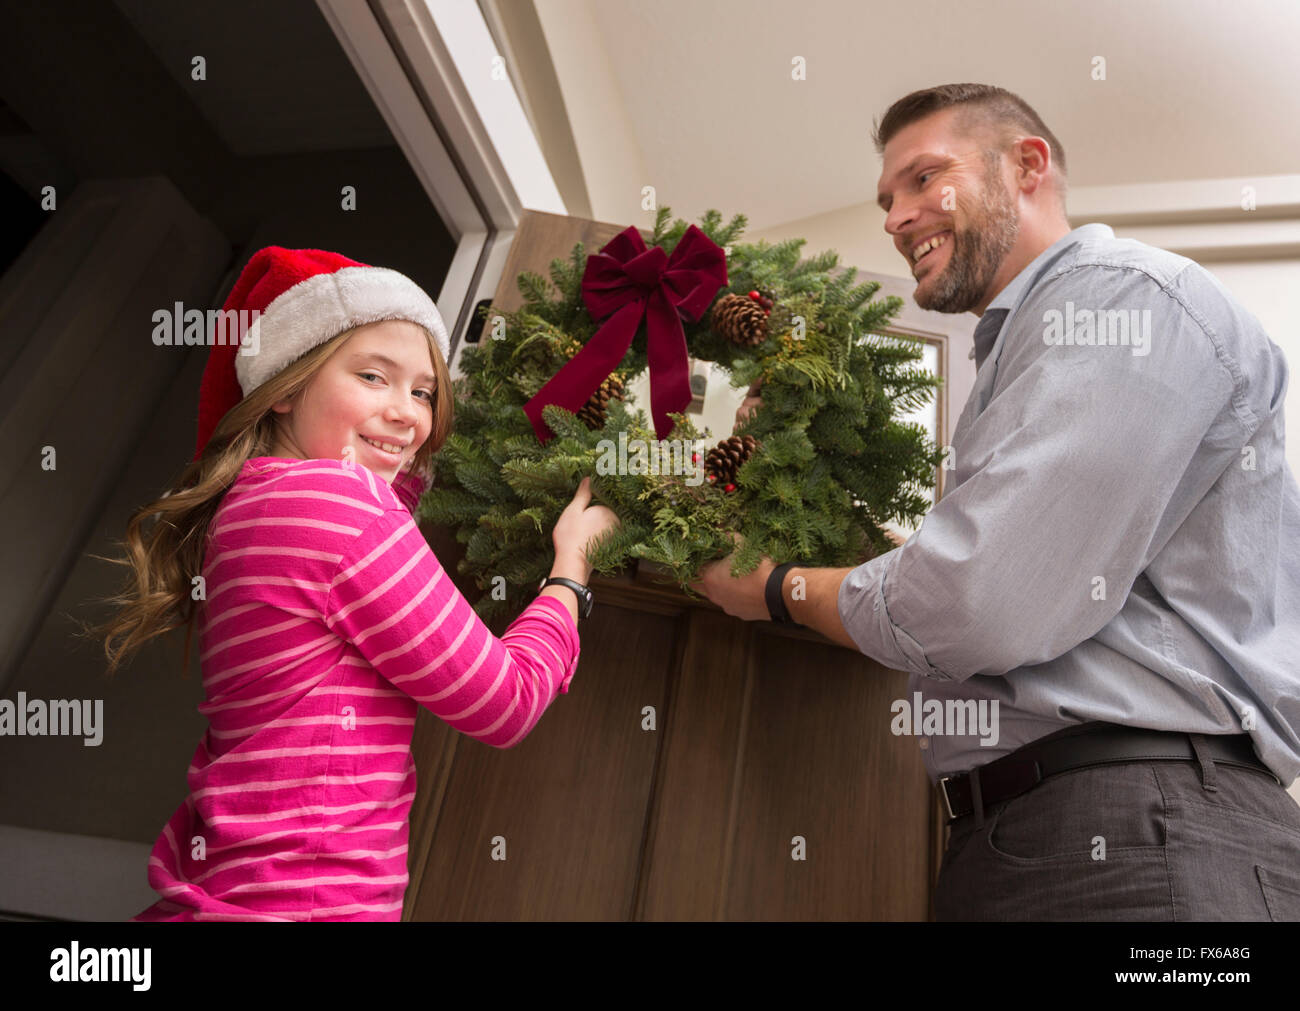 Caucasian father and daughter hanging Christmas wreath Stock Photo